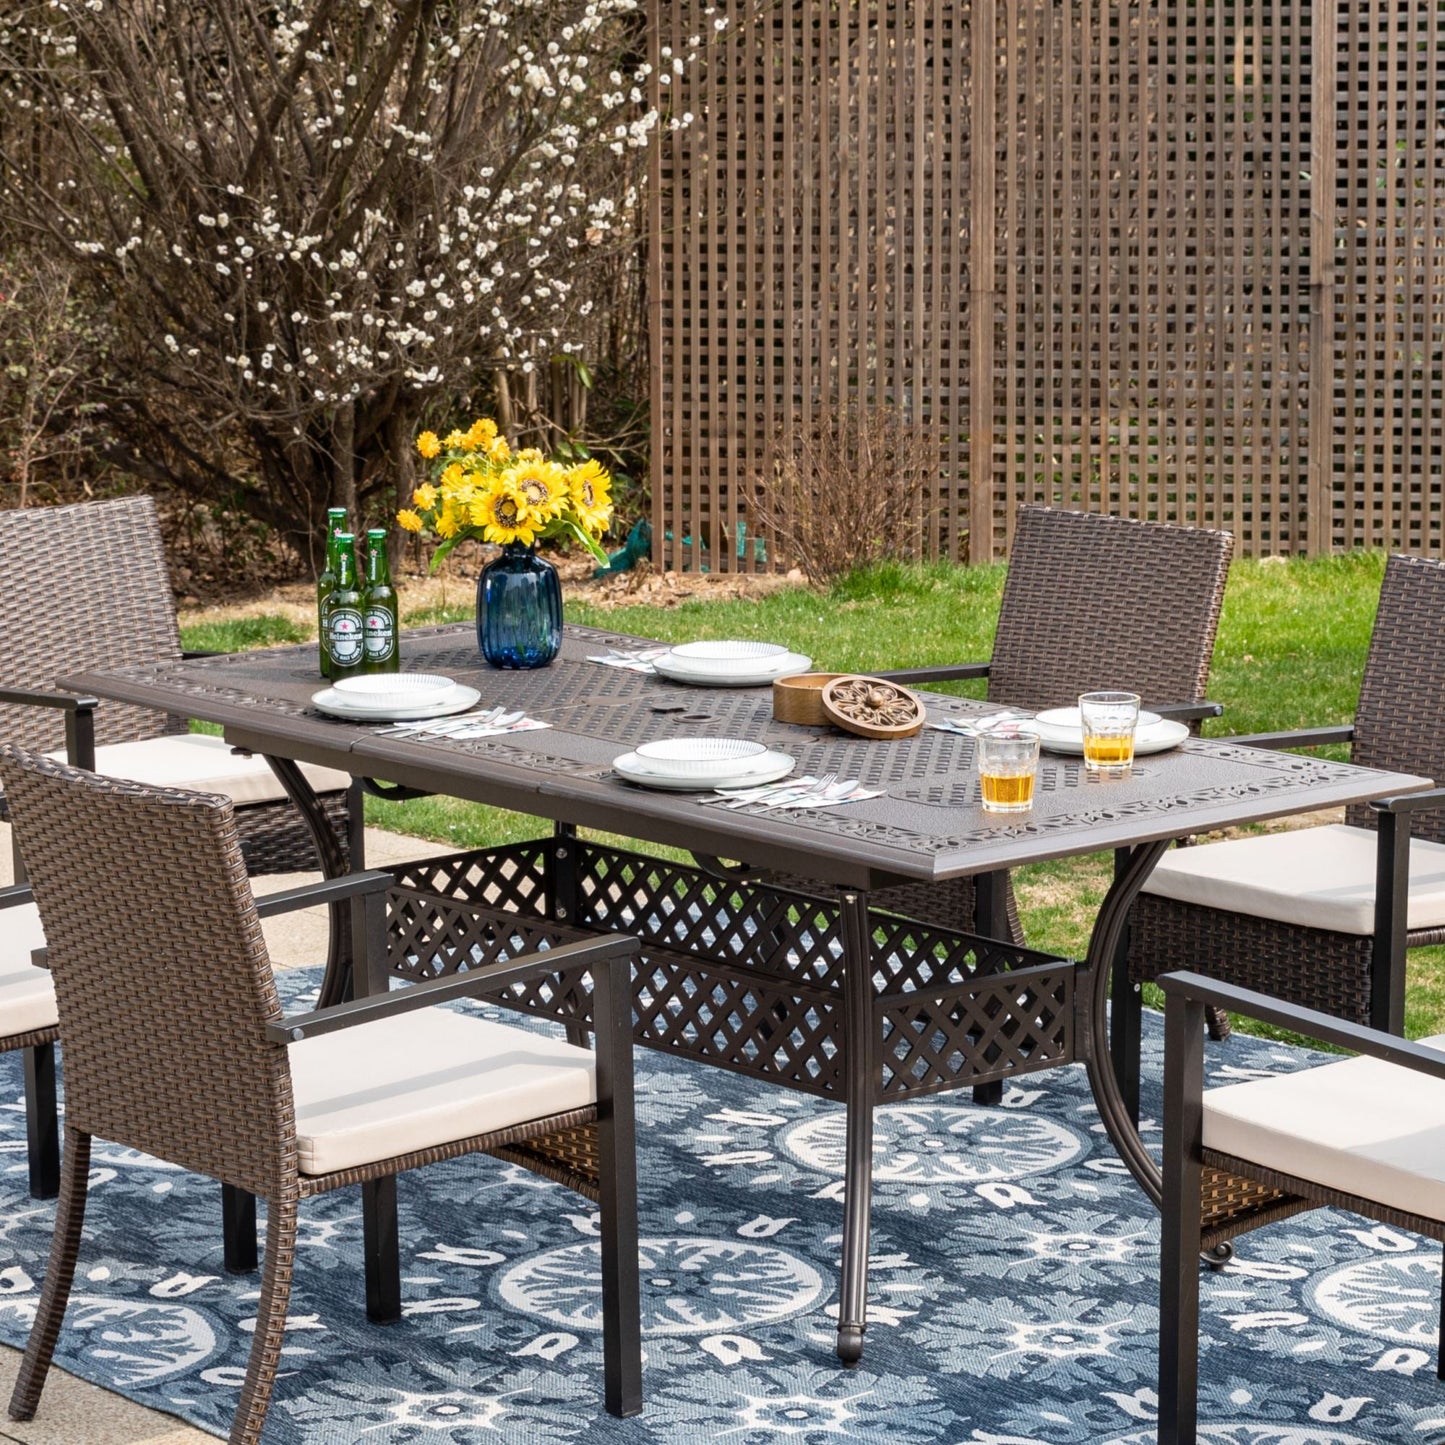 Sophia & William 7 Pieces Cast Aluminum Outdoor Patio Dining Set with Extendable Rectangular Metal Table & Cushioned Wicker Rattan Chairs for 6